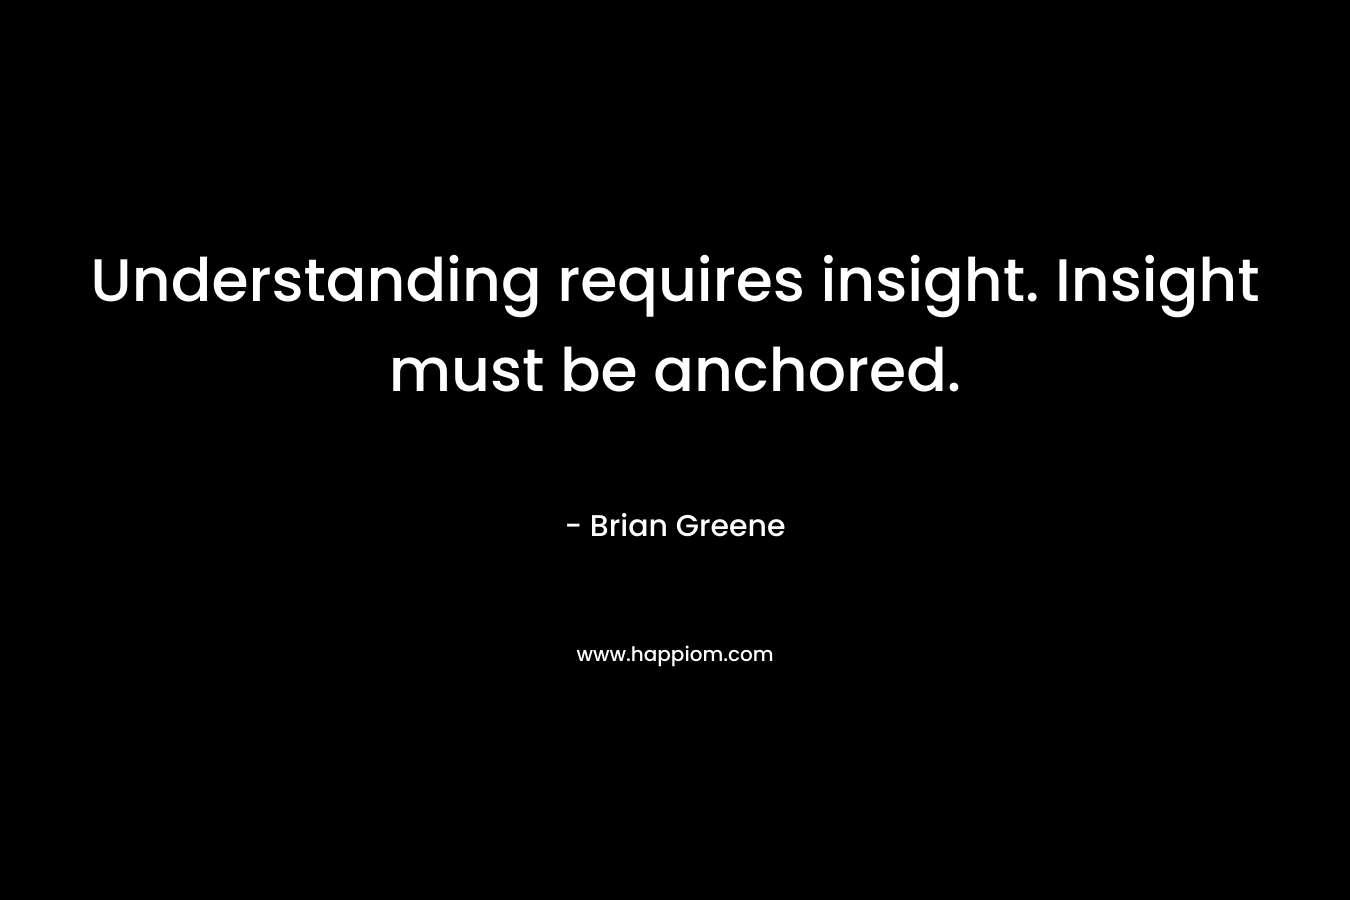 Understanding requires insight. Insight must be anchored.